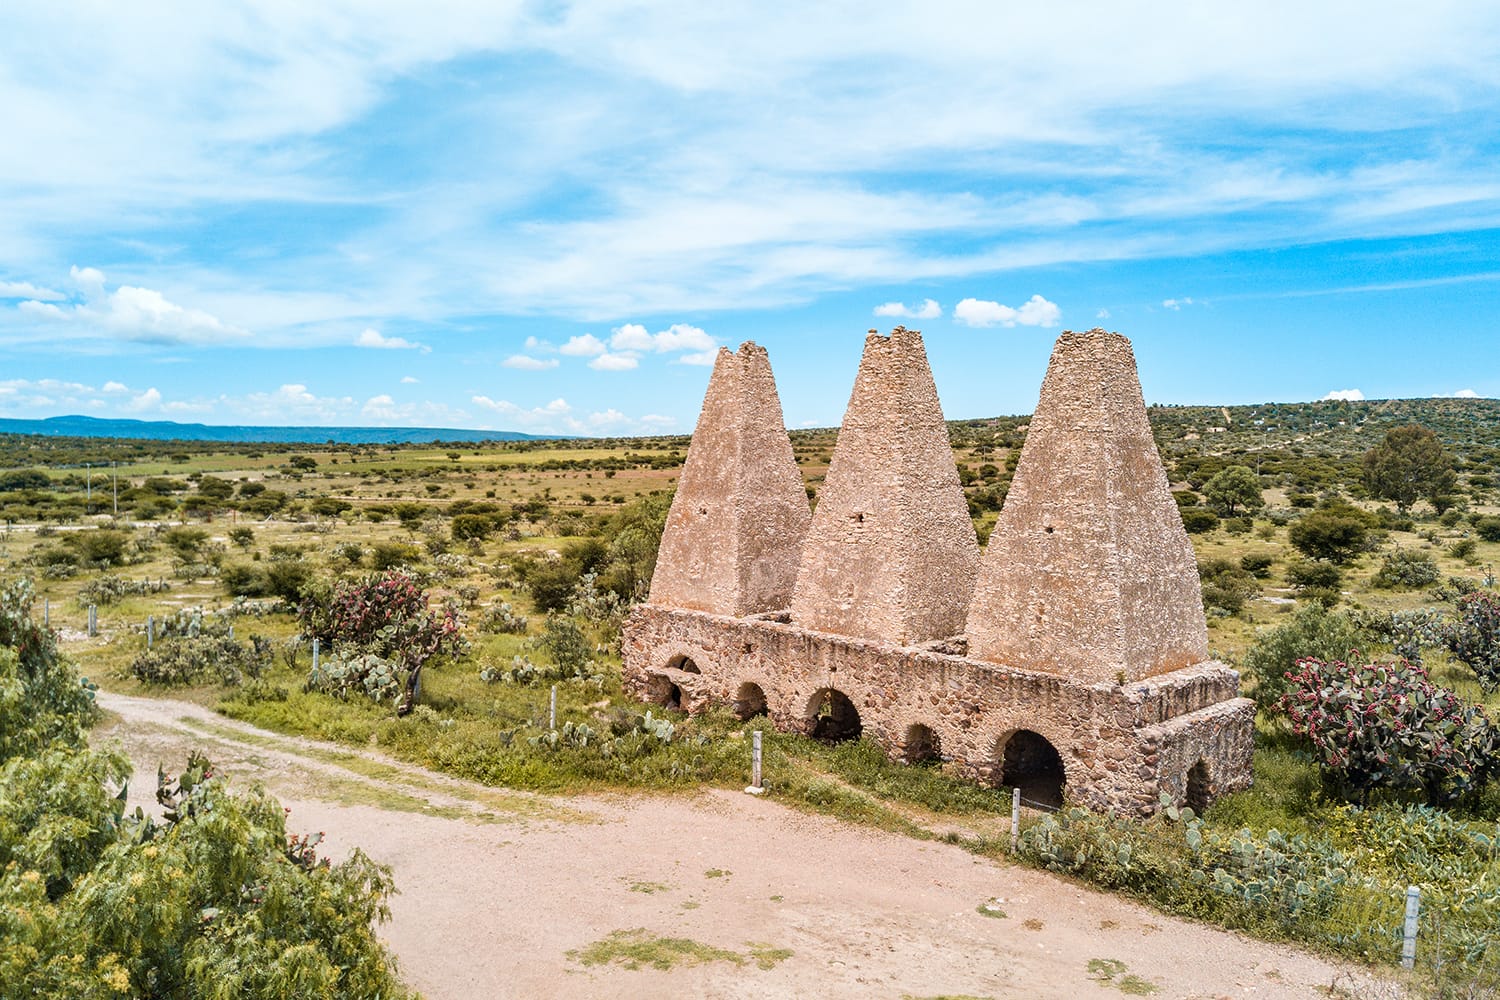 Abandoned ruins of old mining estates at Mineral de Pozos in Guanajuato, Mexico